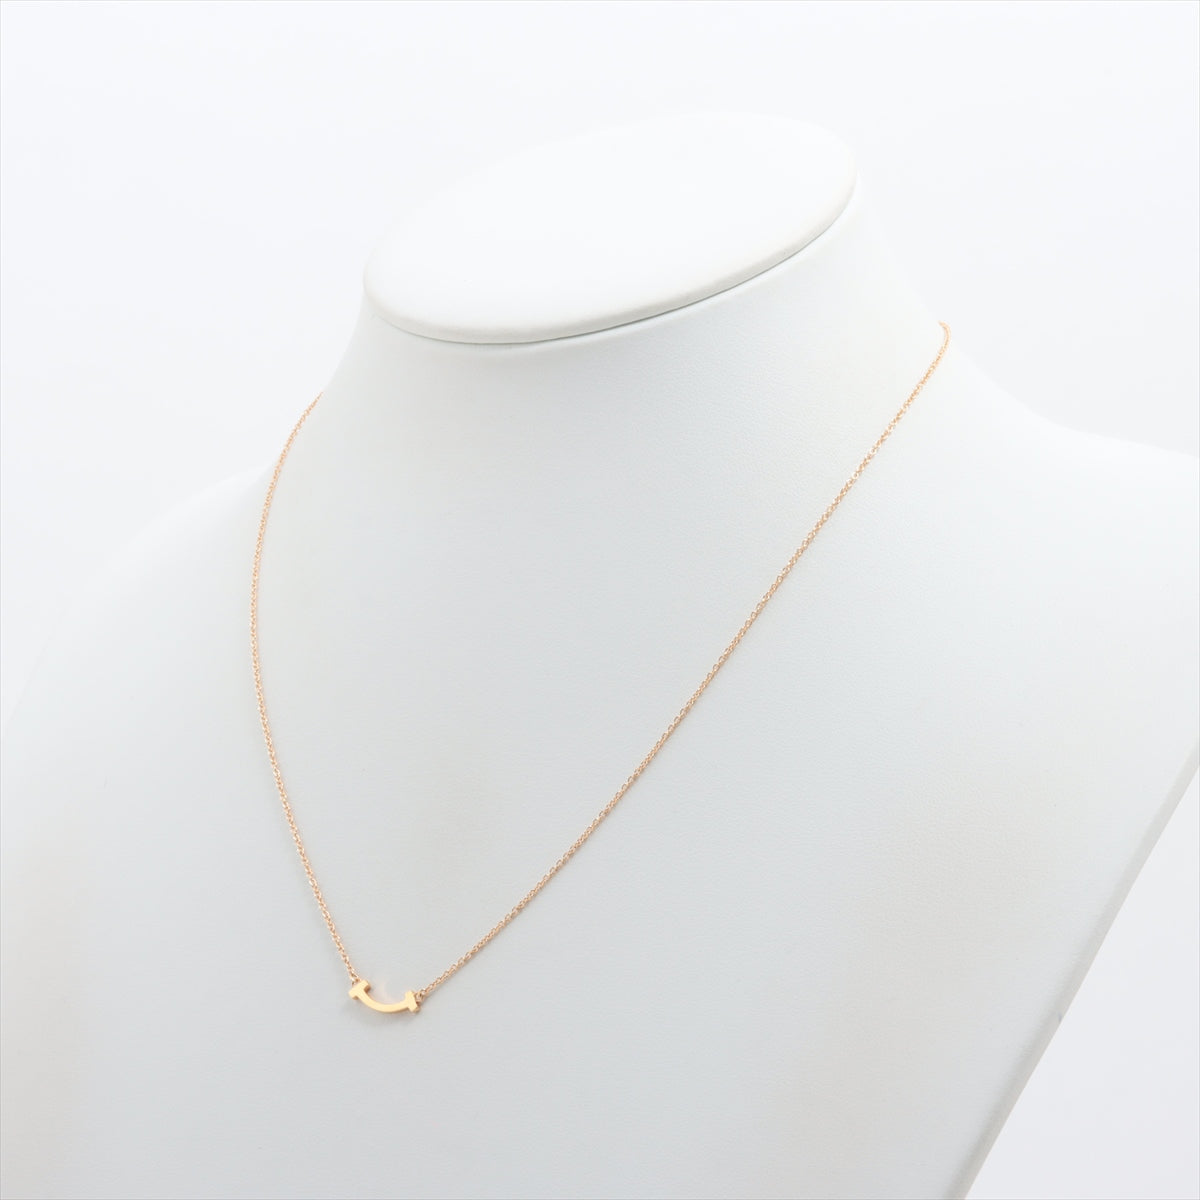 Tiffany T Smile Micro Necklace 750 (YG) 2.4g